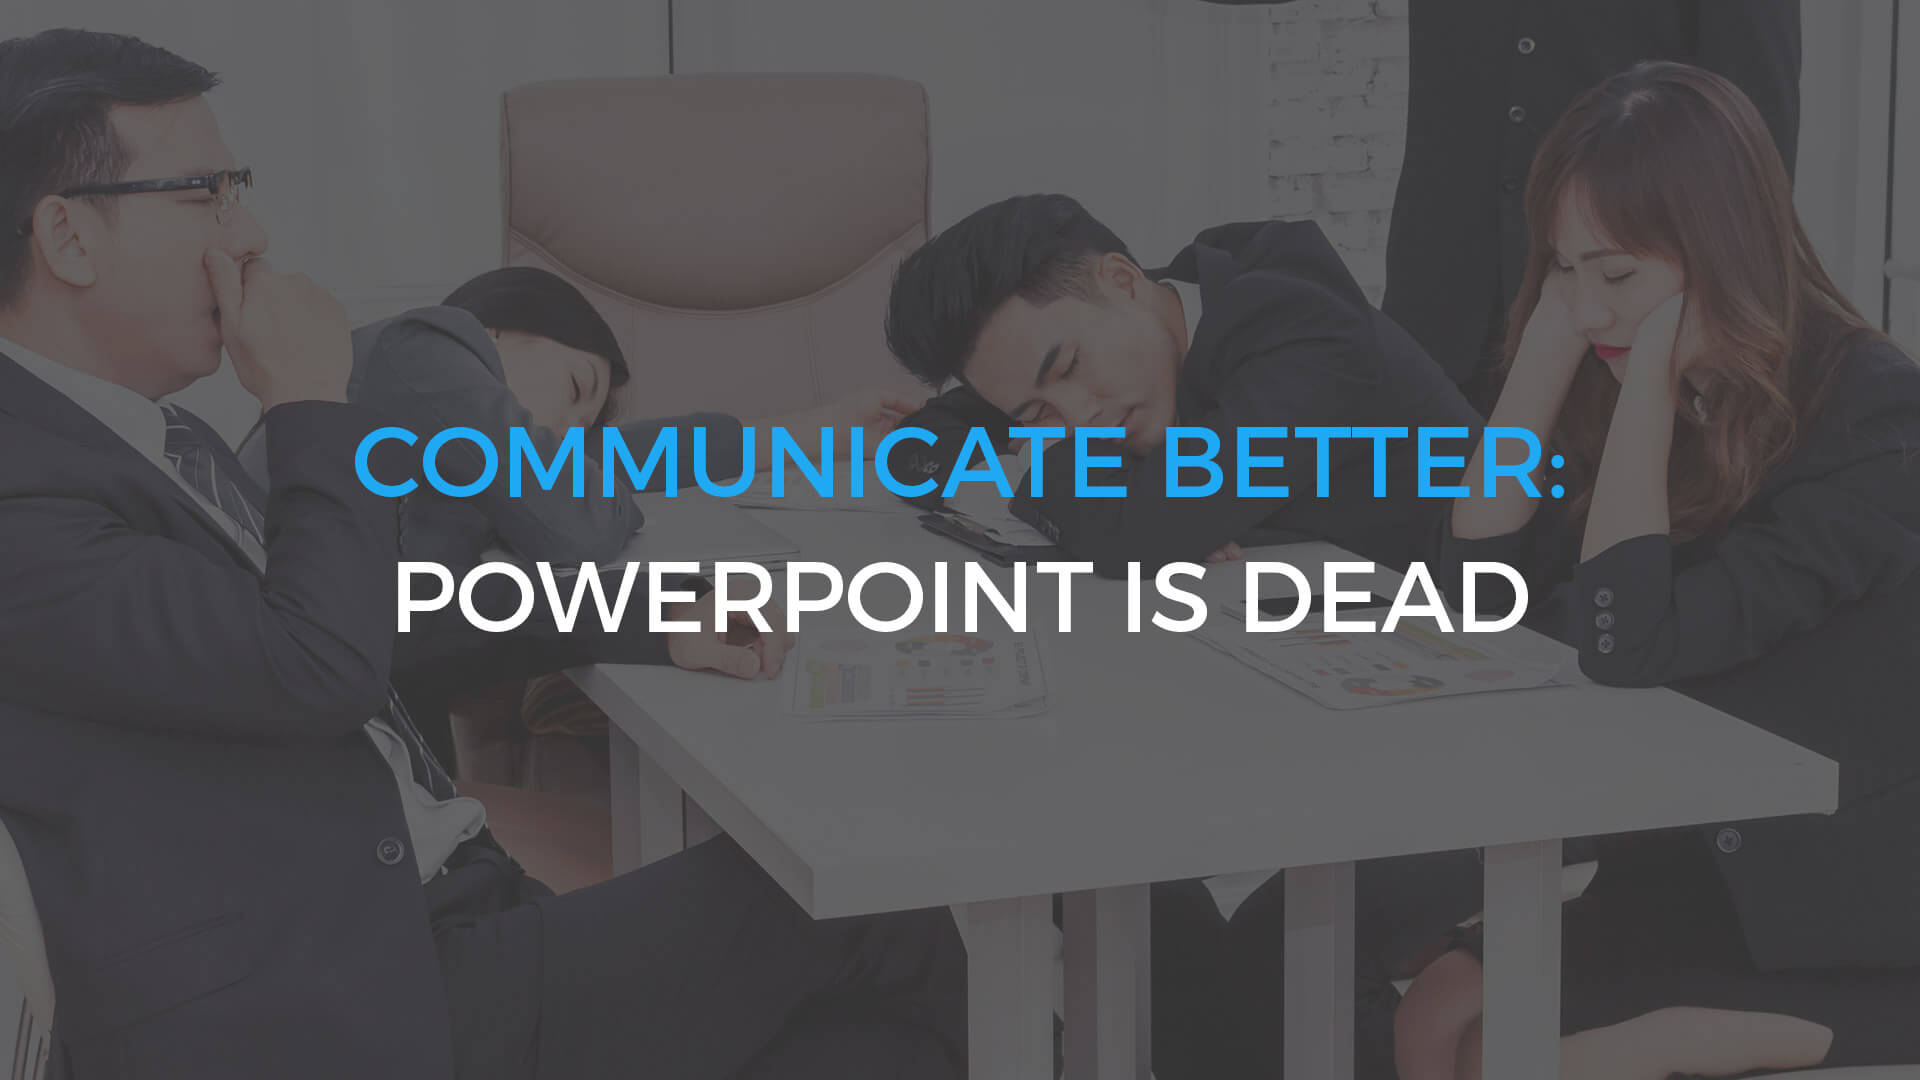 PowerPoint is dead: Communicate better with Digital Signage